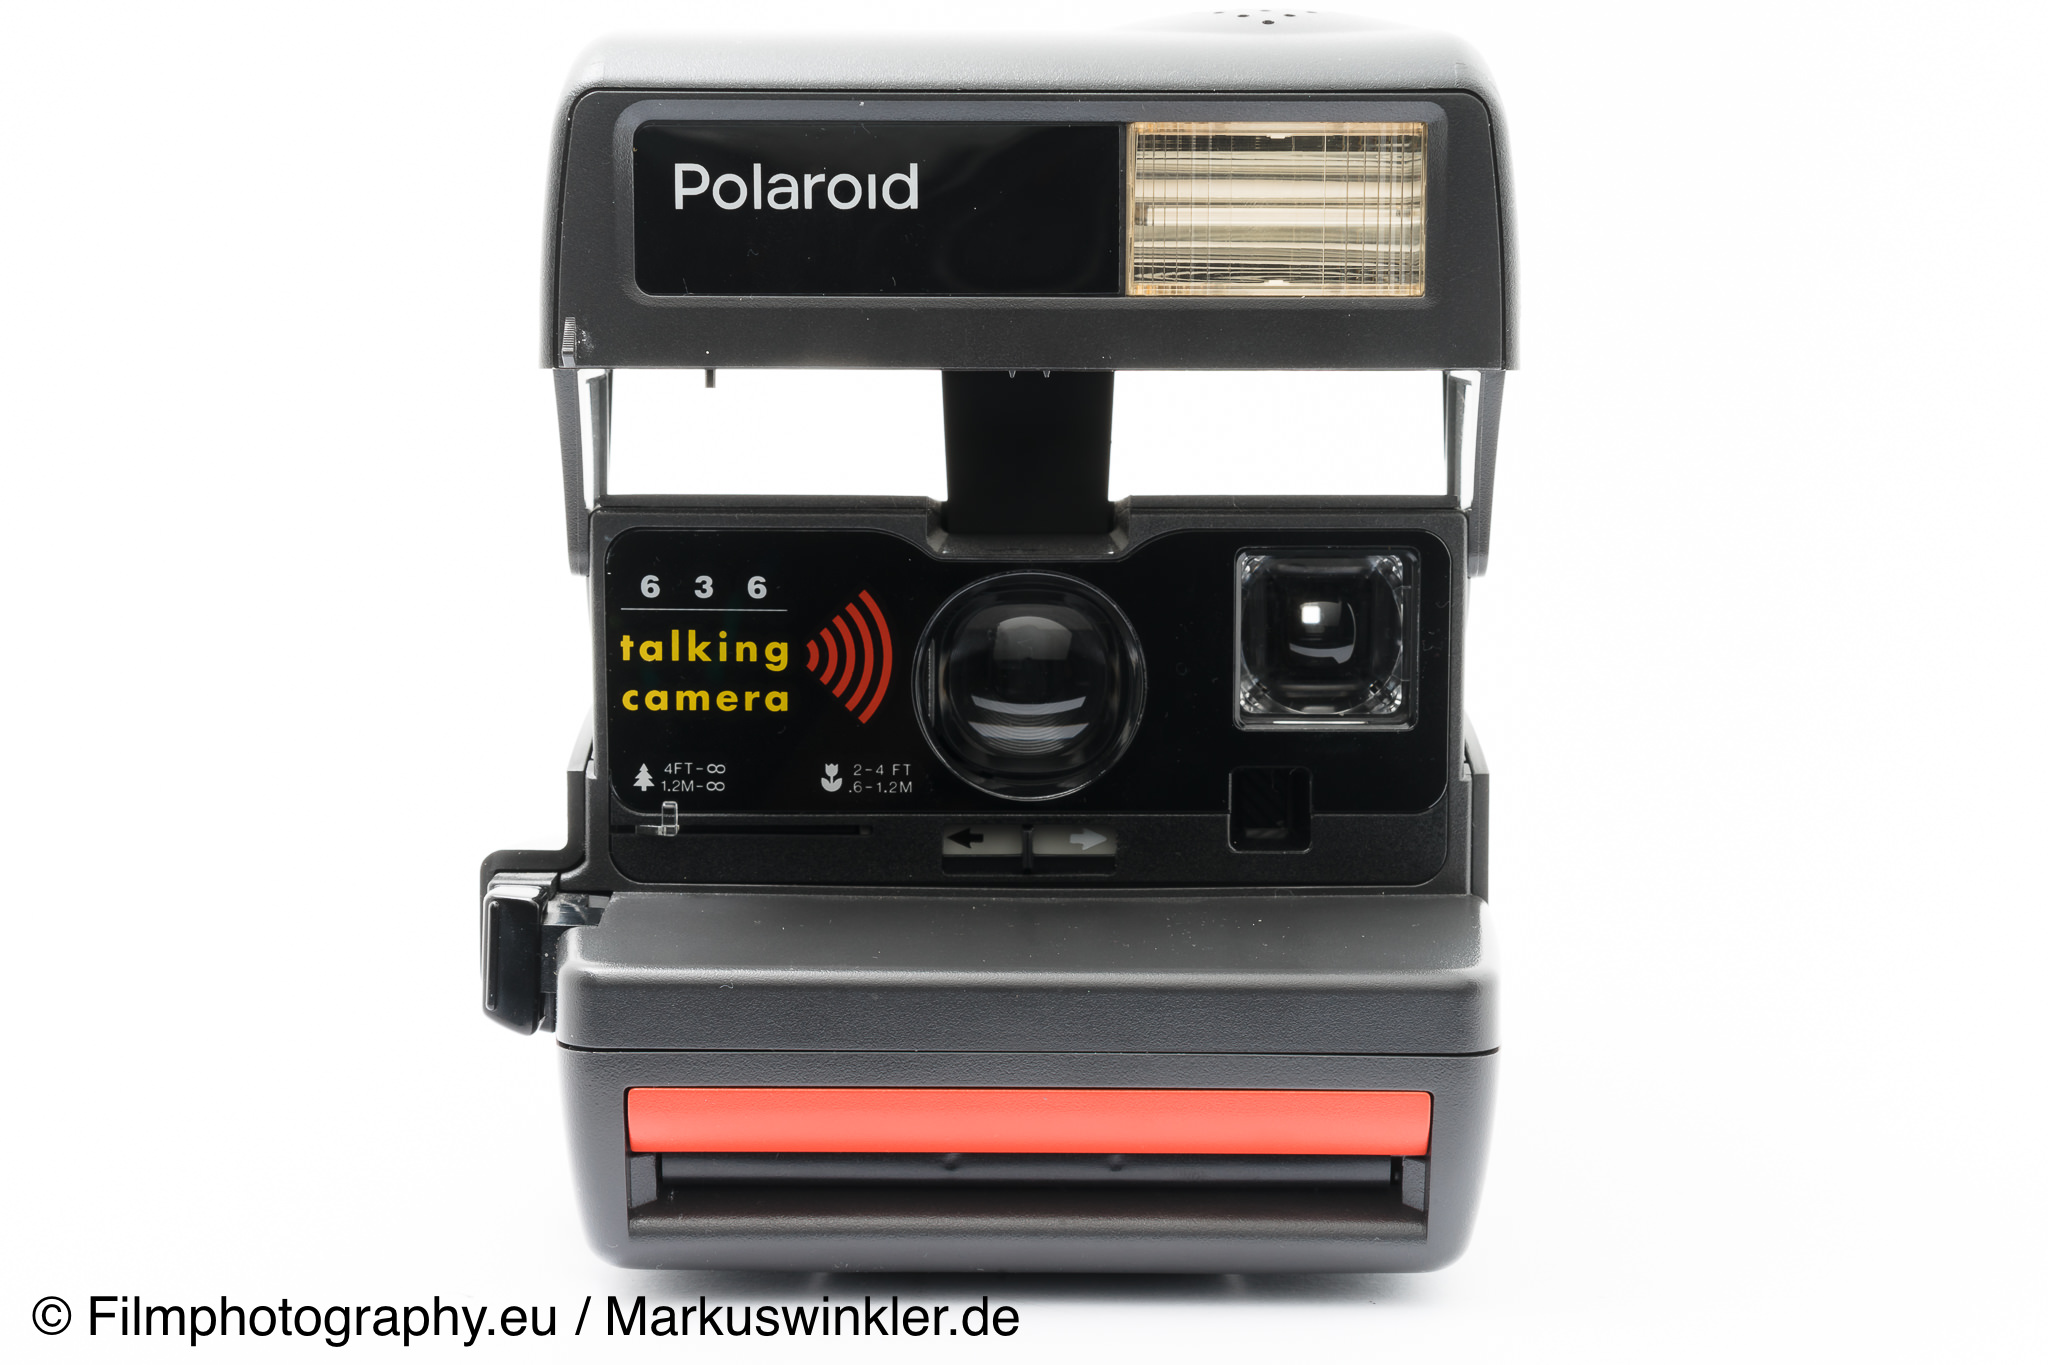 Polaroid 636 Talking Camera - Learn more about this speaking camera